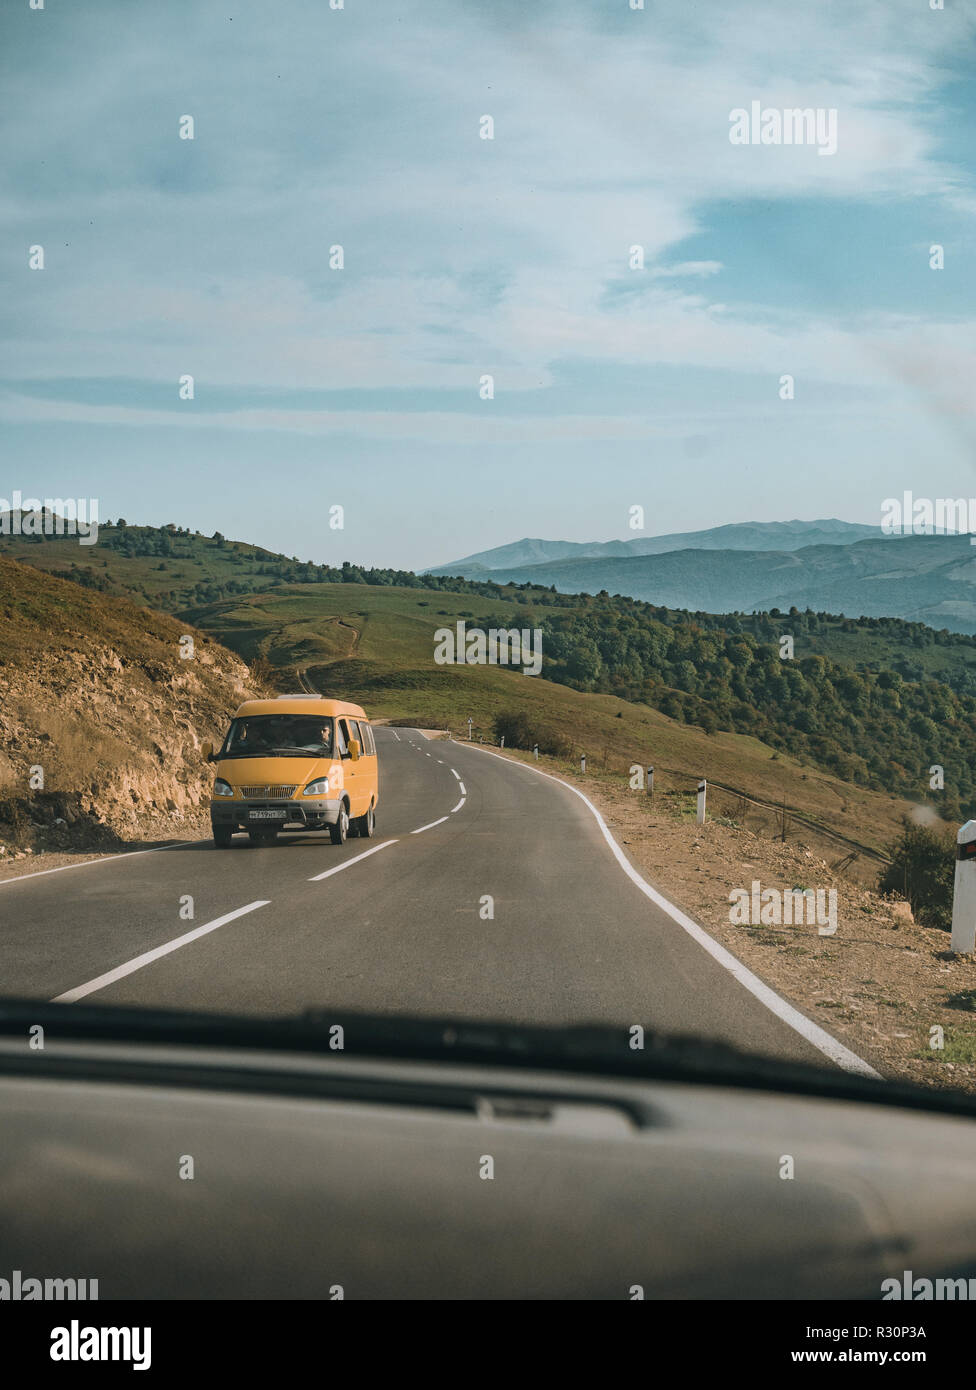 On the road in Dagestan Mountains, Russia. Wonderful view, landscape and cool yellow public bus in the front. Stock Photo